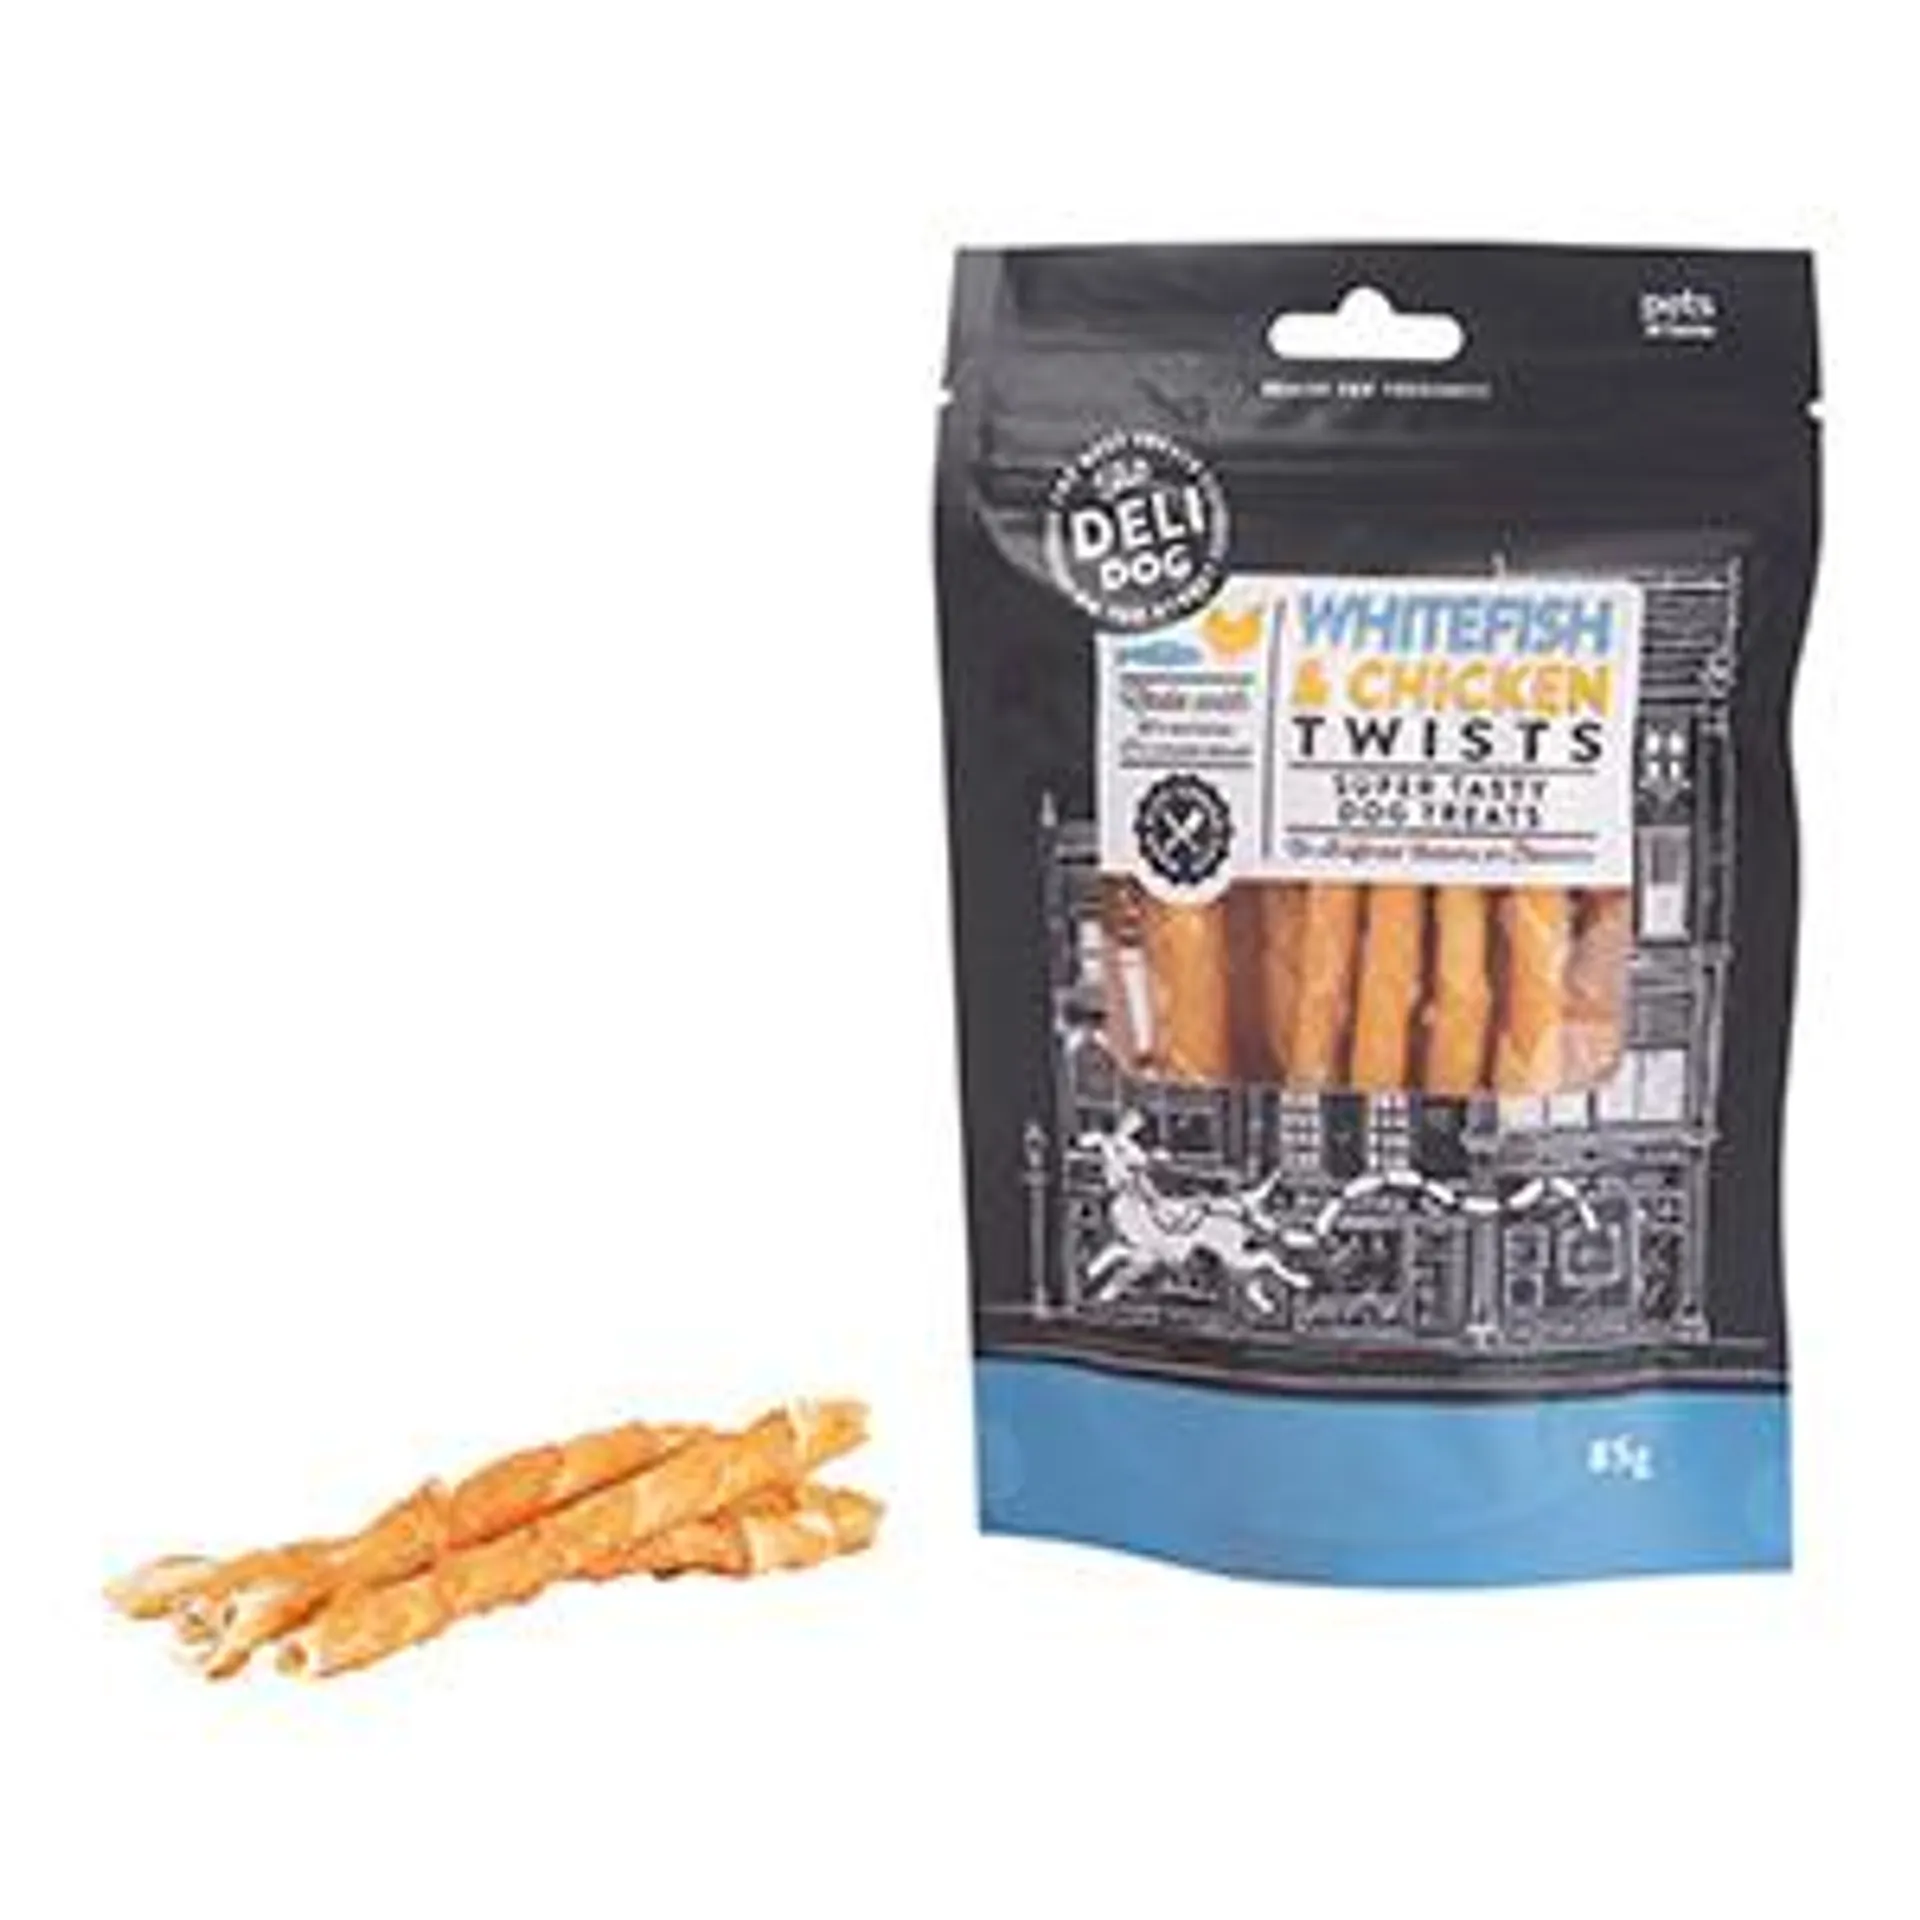 Pets at Home The Deli Dog Whitefish and Chicken Twists Adult Dog Treats 85g